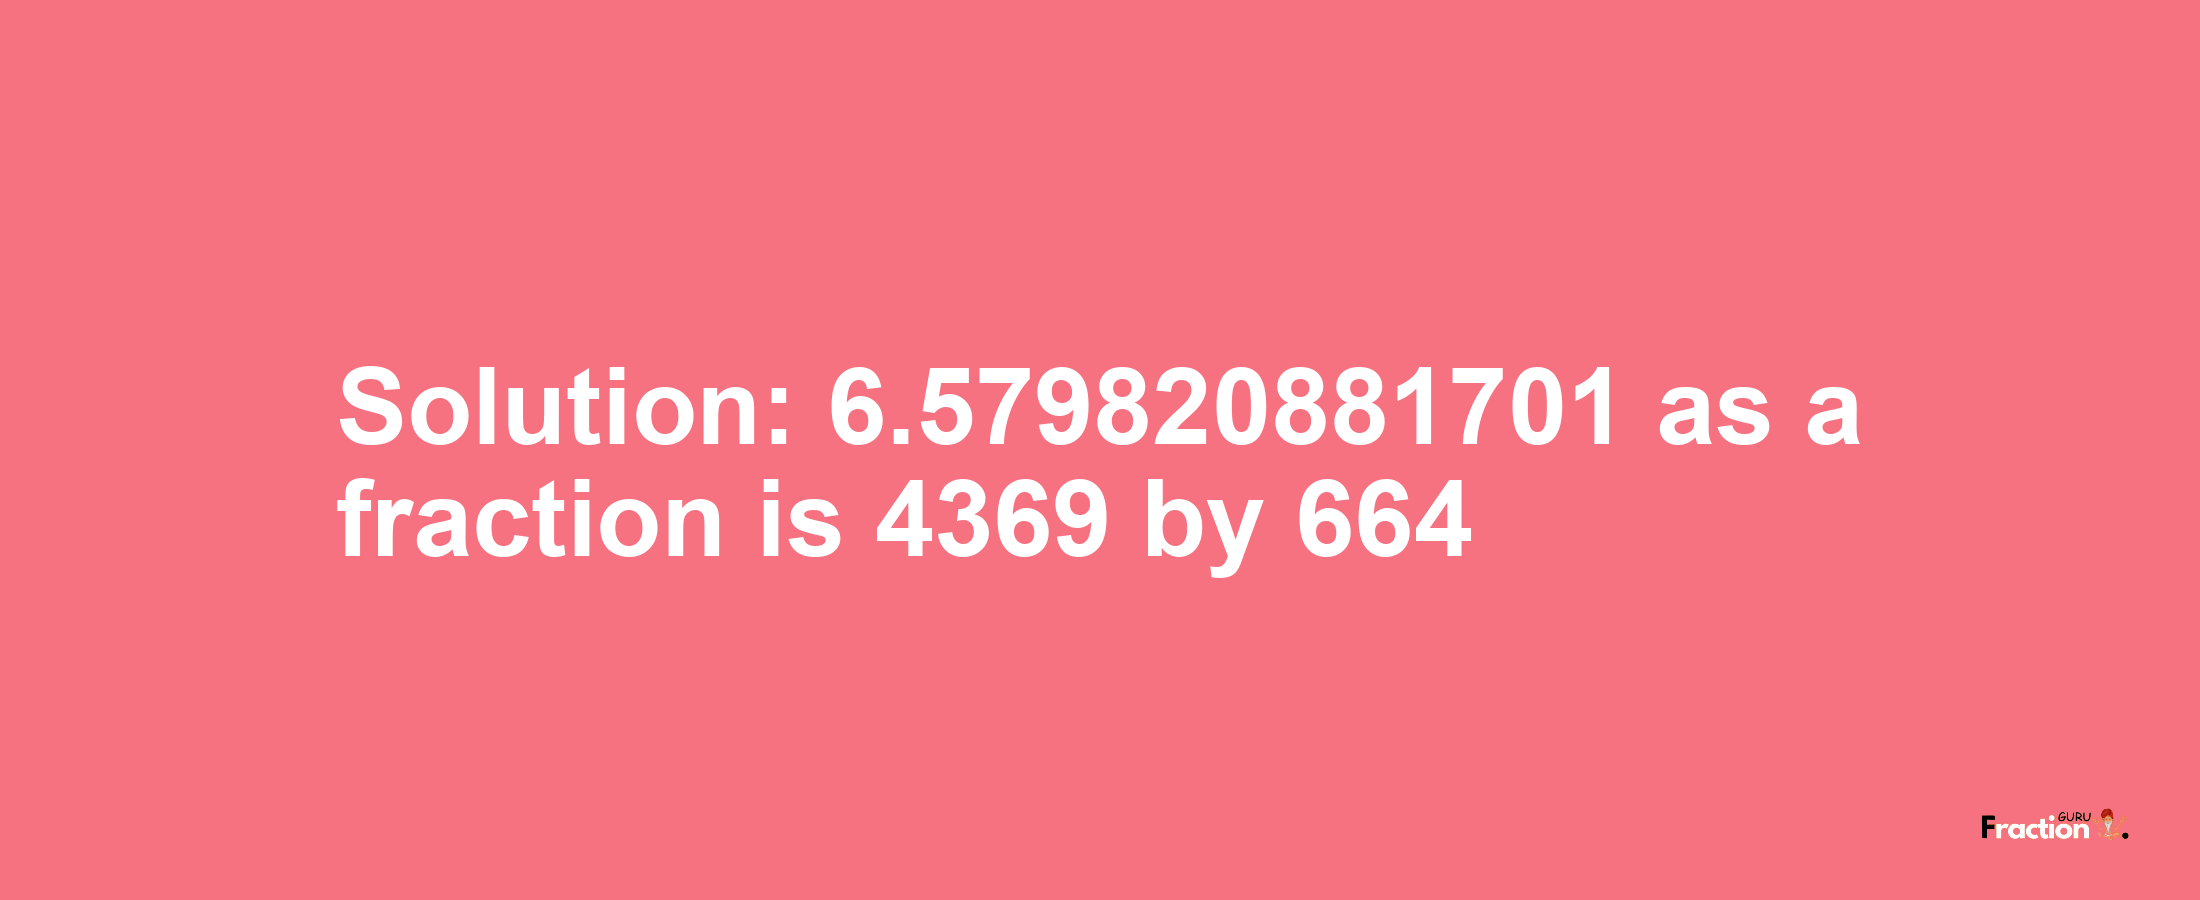 Solution:6.579820881701 as a fraction is 4369/664